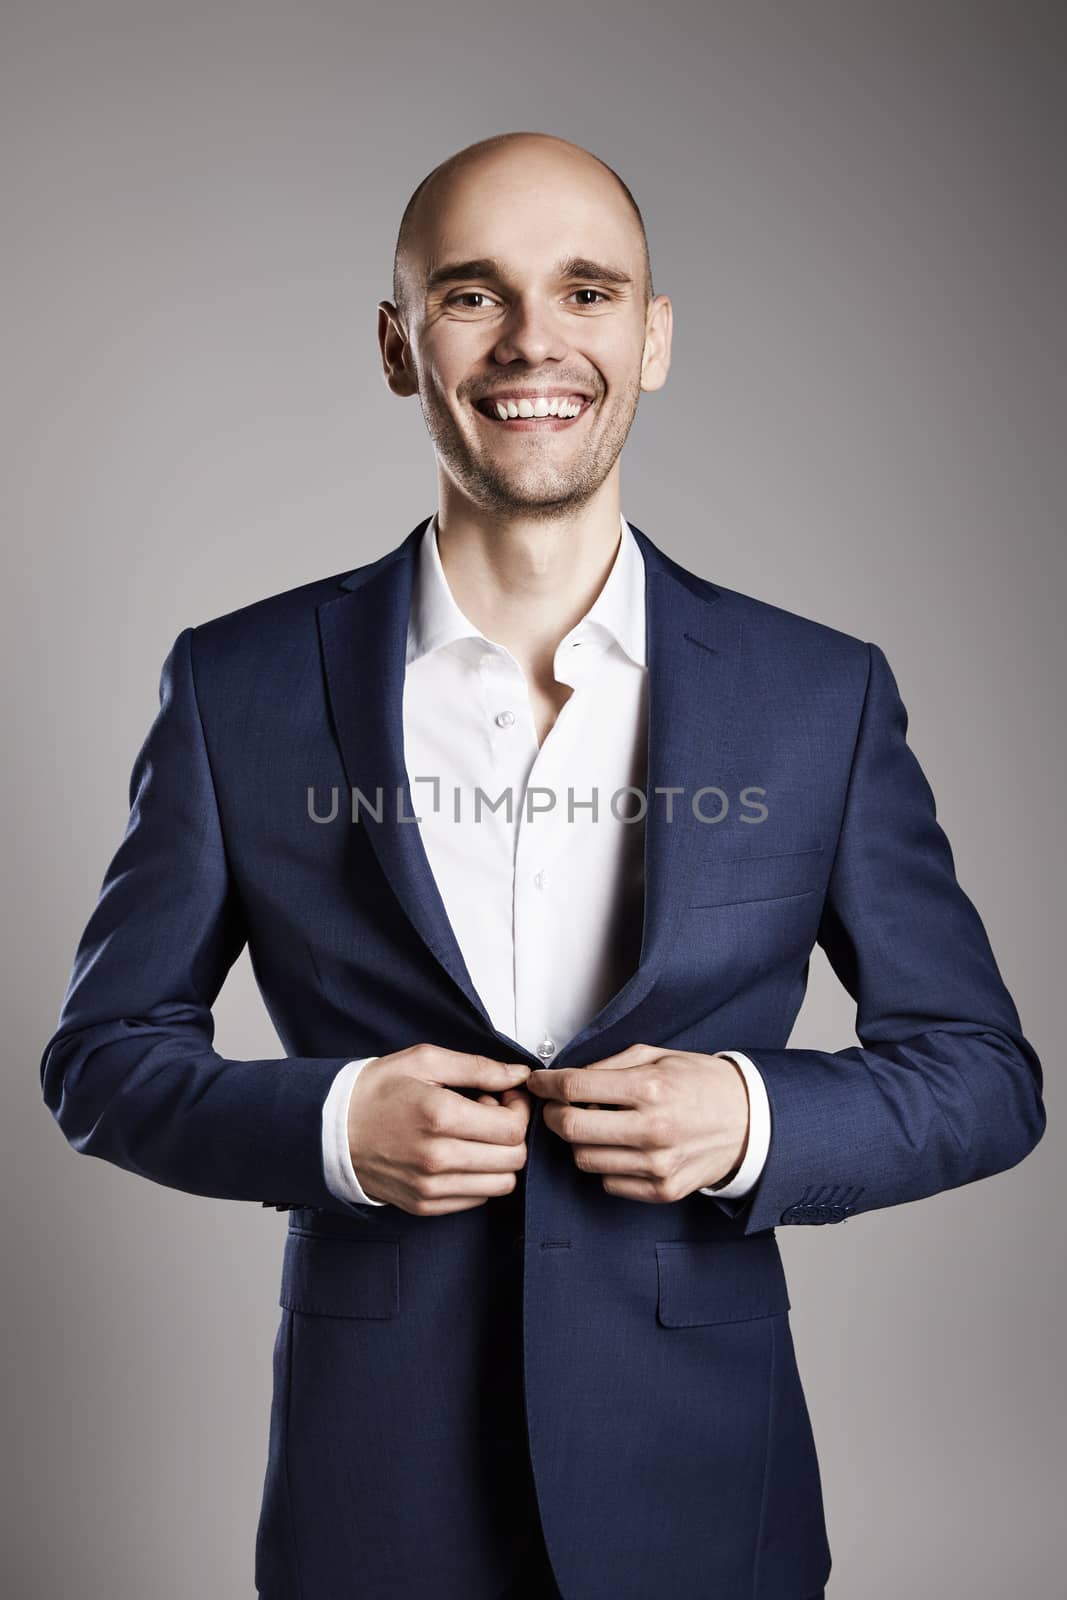 Portrait of young smiling man getting ready.